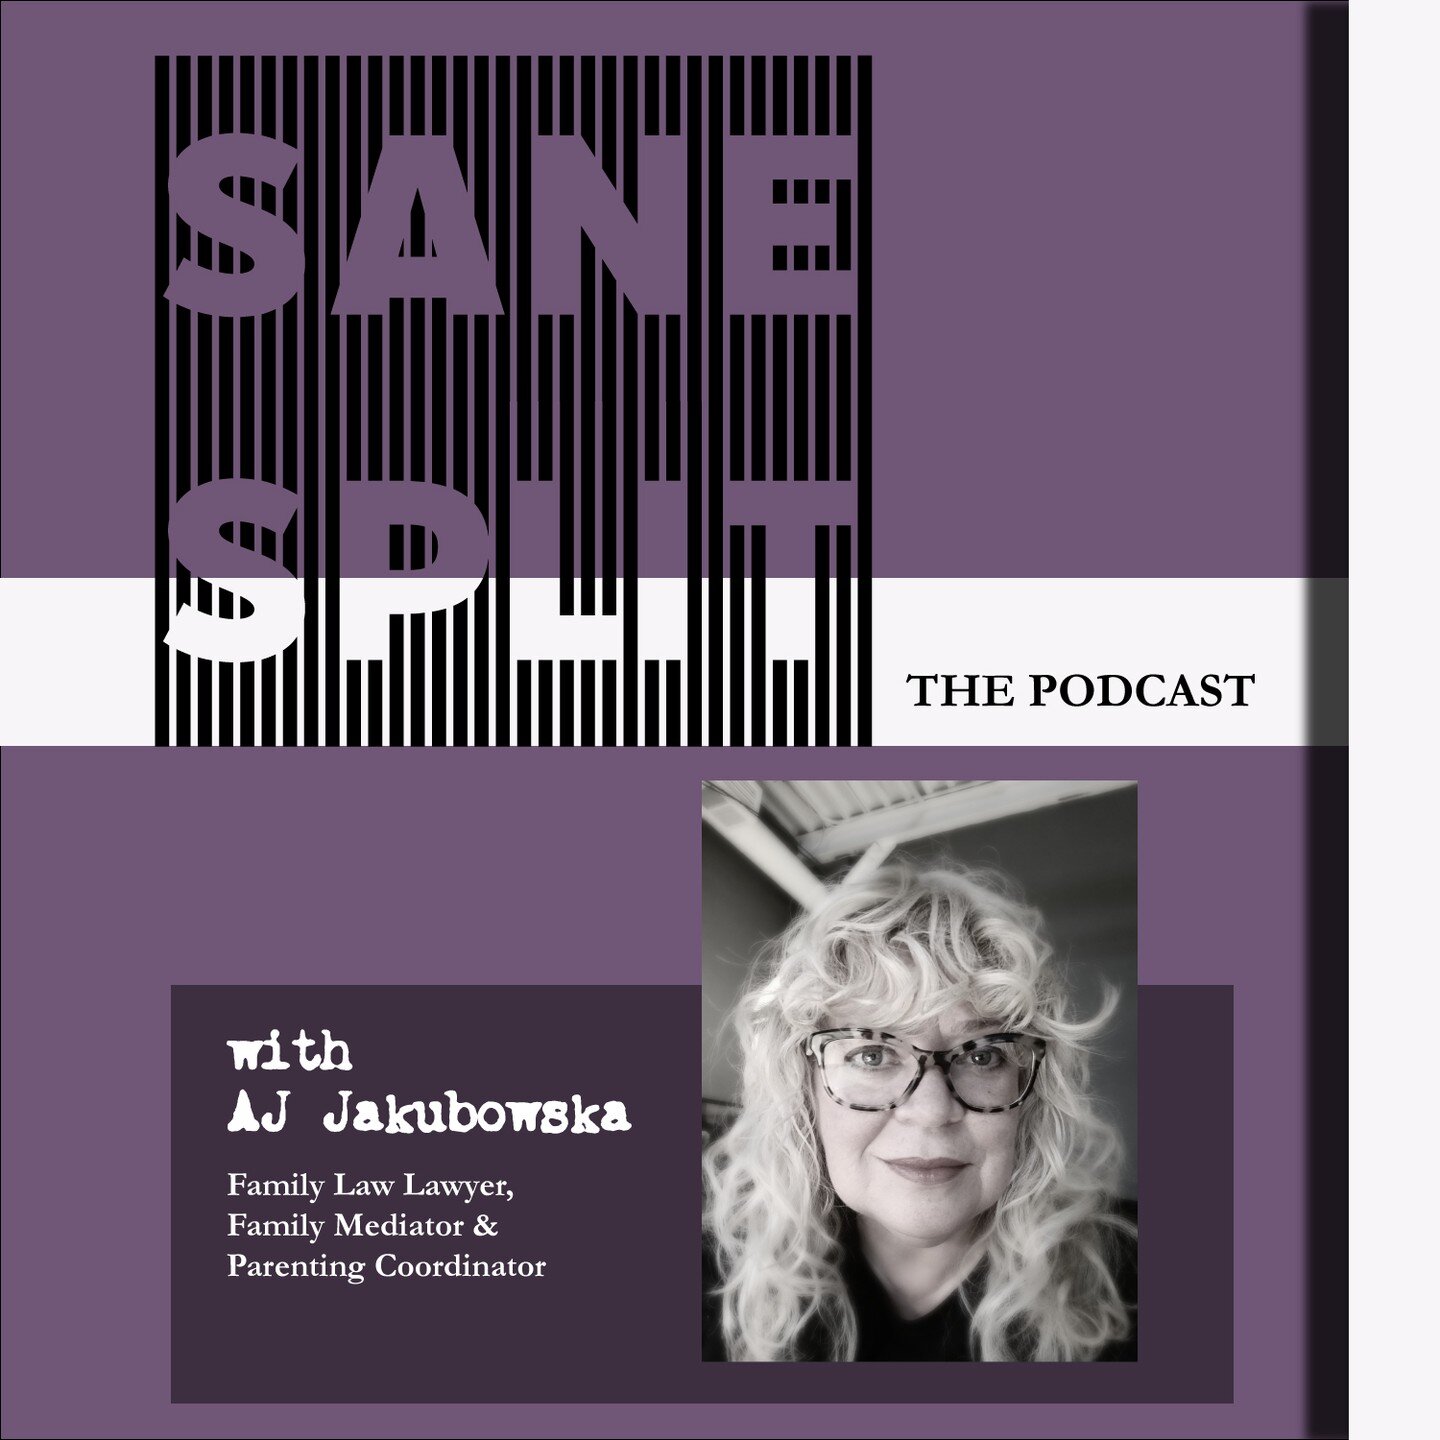 The SANE SPLIT podcast is back! In the latest episode, I explore how Family Law lawyers bill....in the next episode, I discuss how mediators bill.

https://www.separationinontario.com/sane-split-podcast
#sanesplitpodcast #separation #divorce #familyl